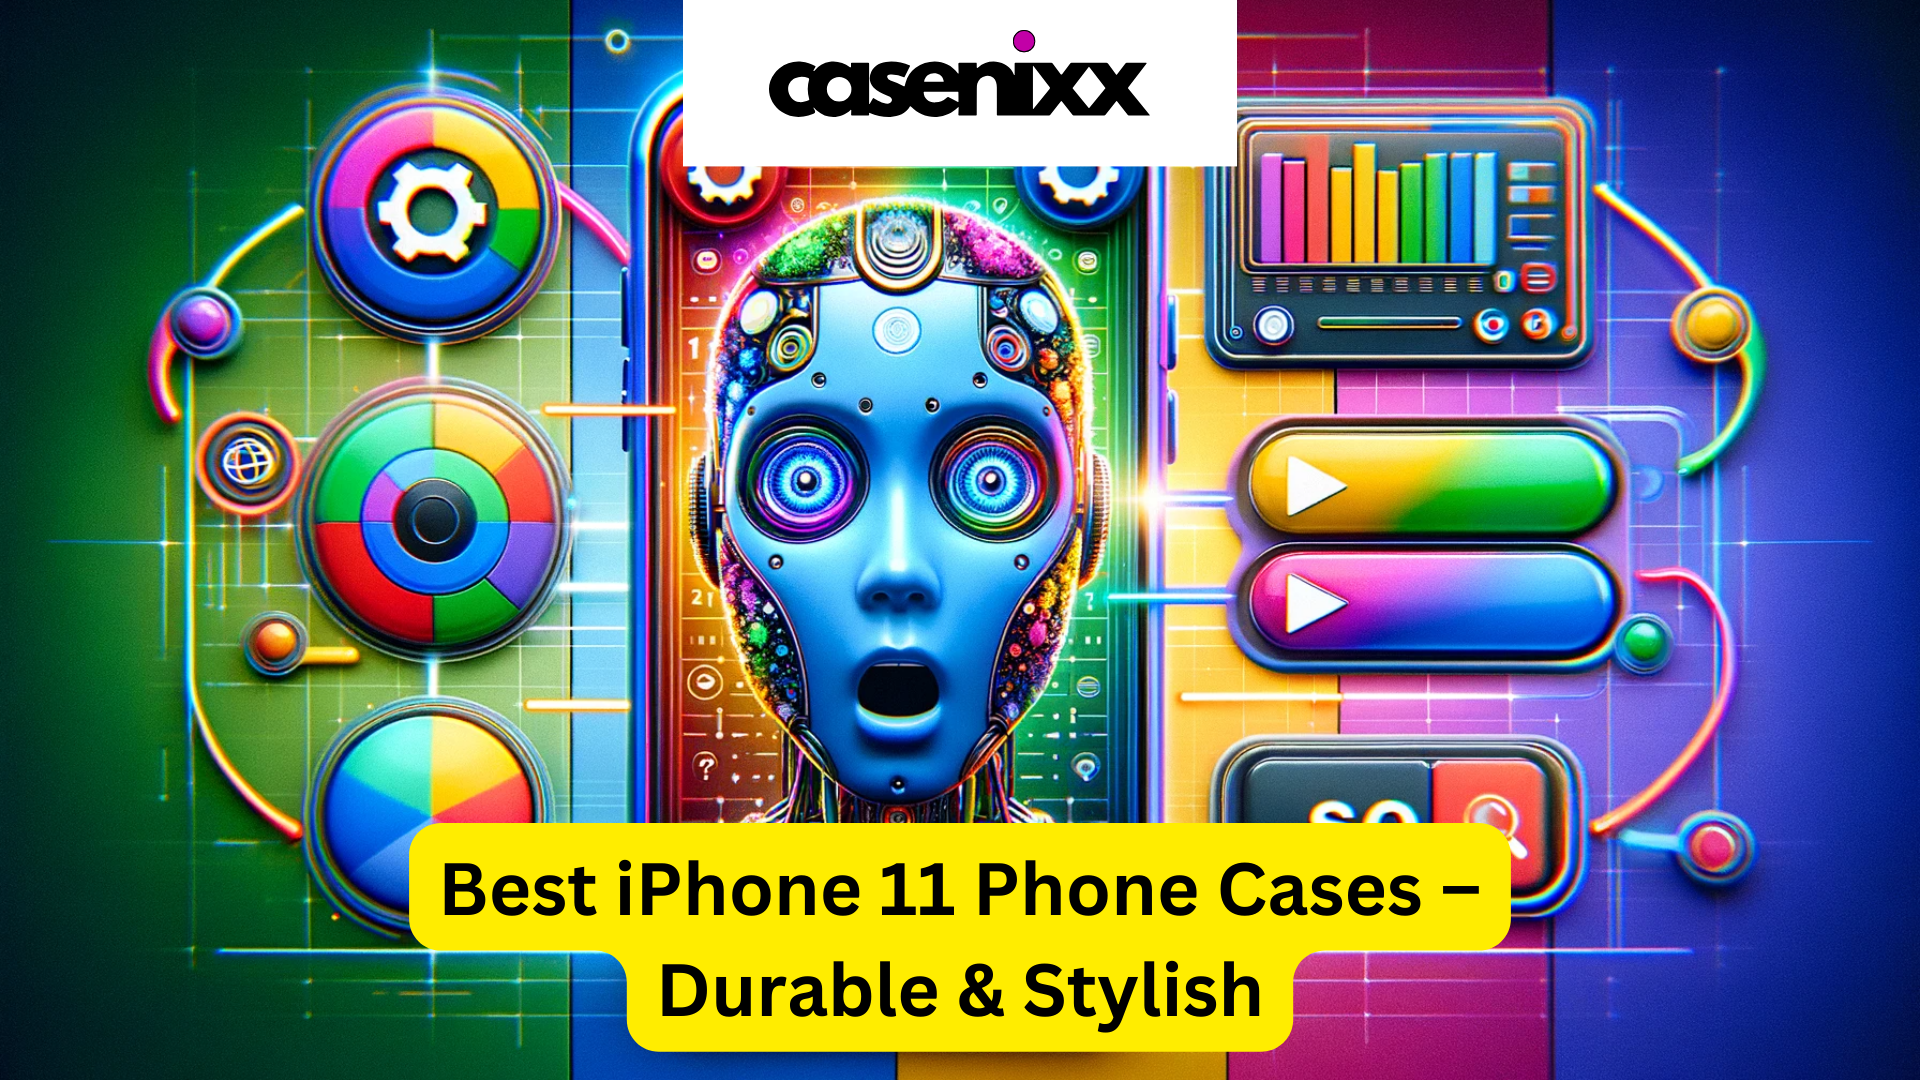 Best iPhone 11 Phone Cases – Durable & Stylish